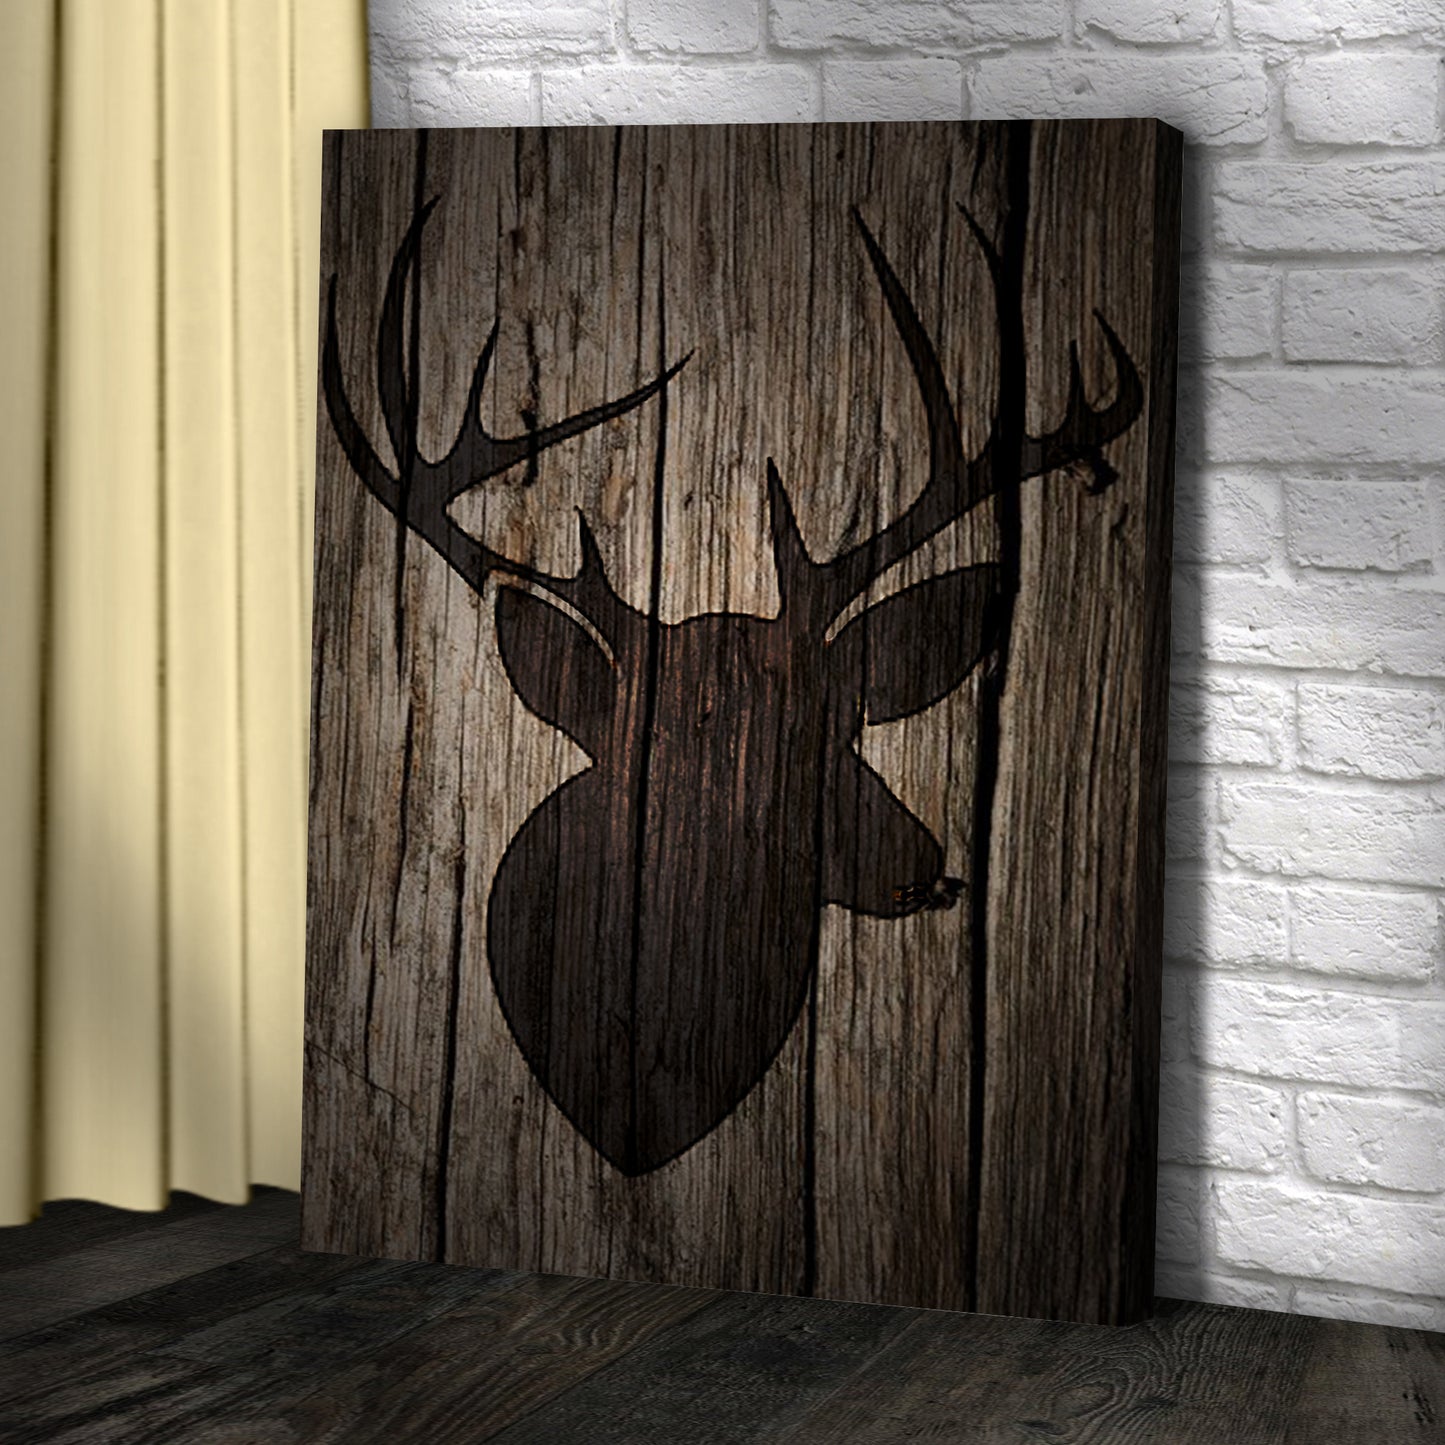 Rustic Deer With Antler Silhouette Canvas Wall Art Style 1 - Image by Tailored Canvases